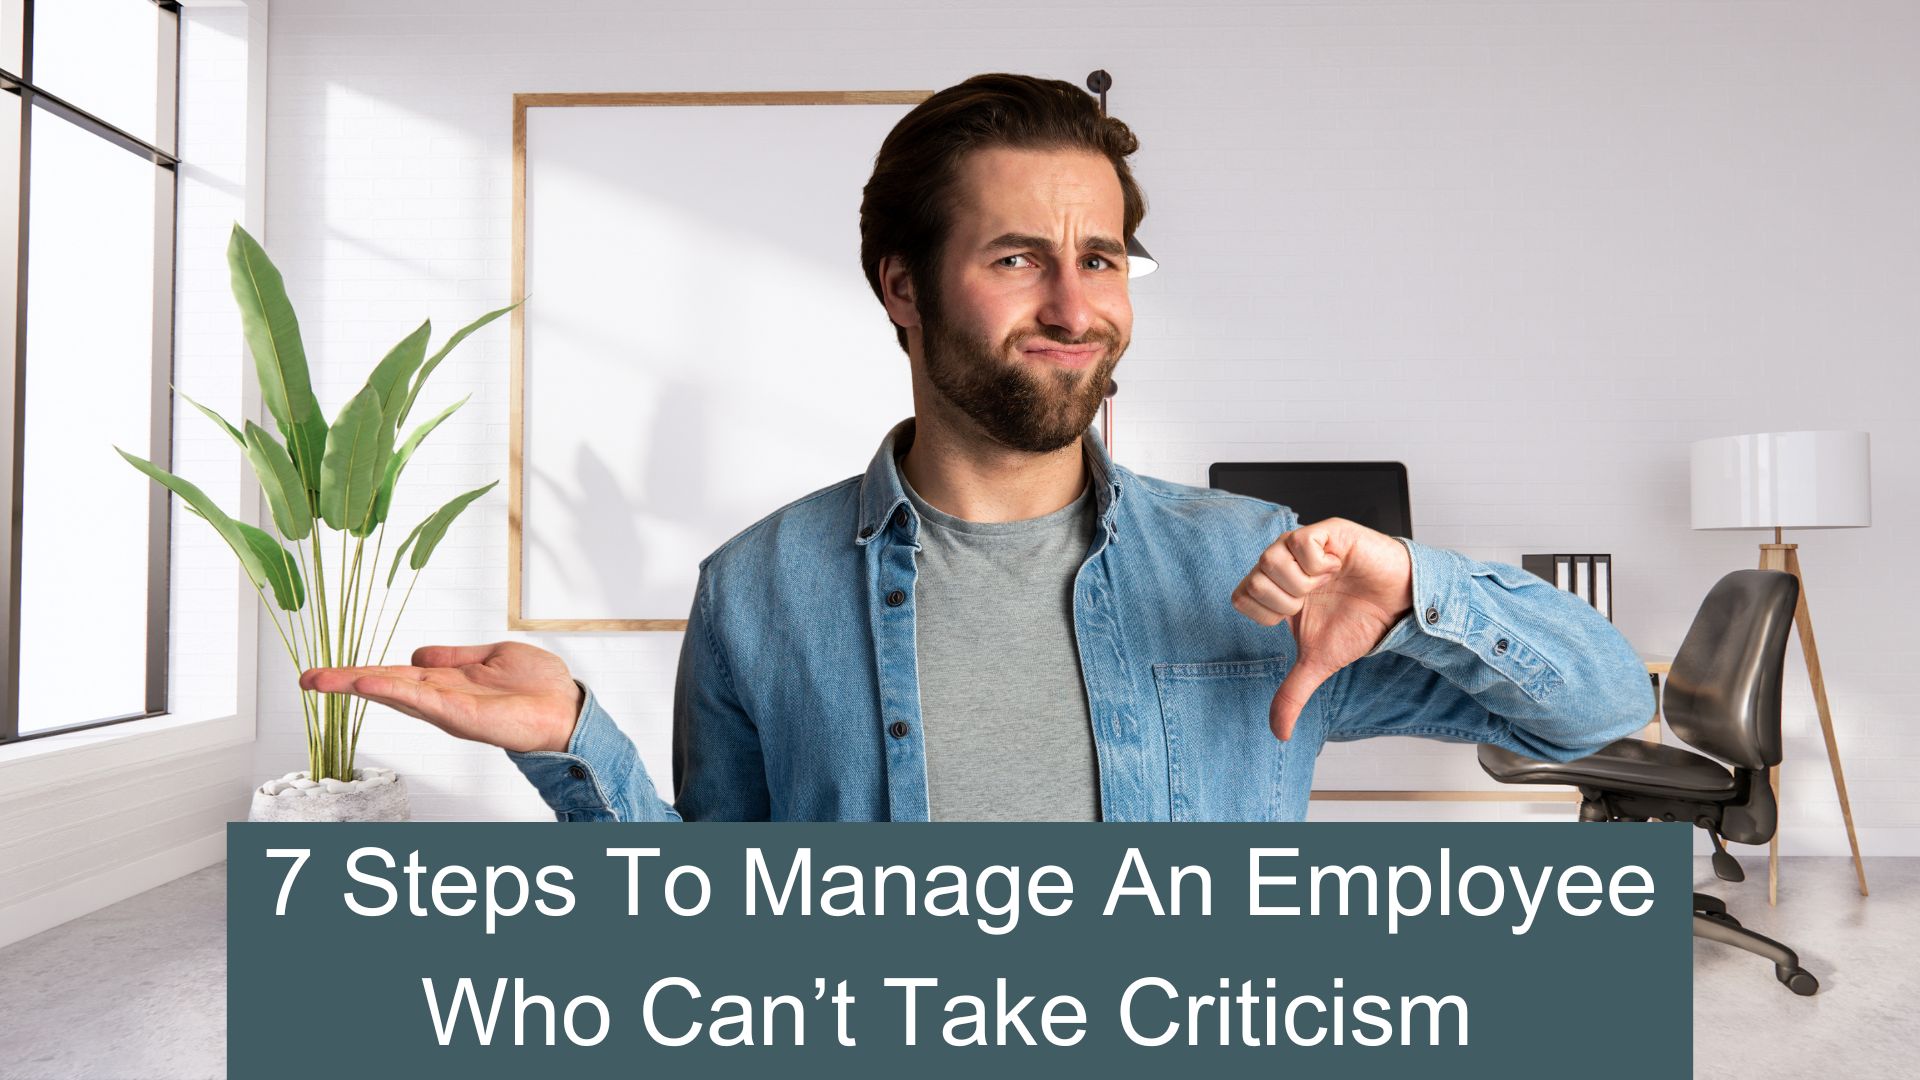 7 Steps to manage an employee who won't take criticism